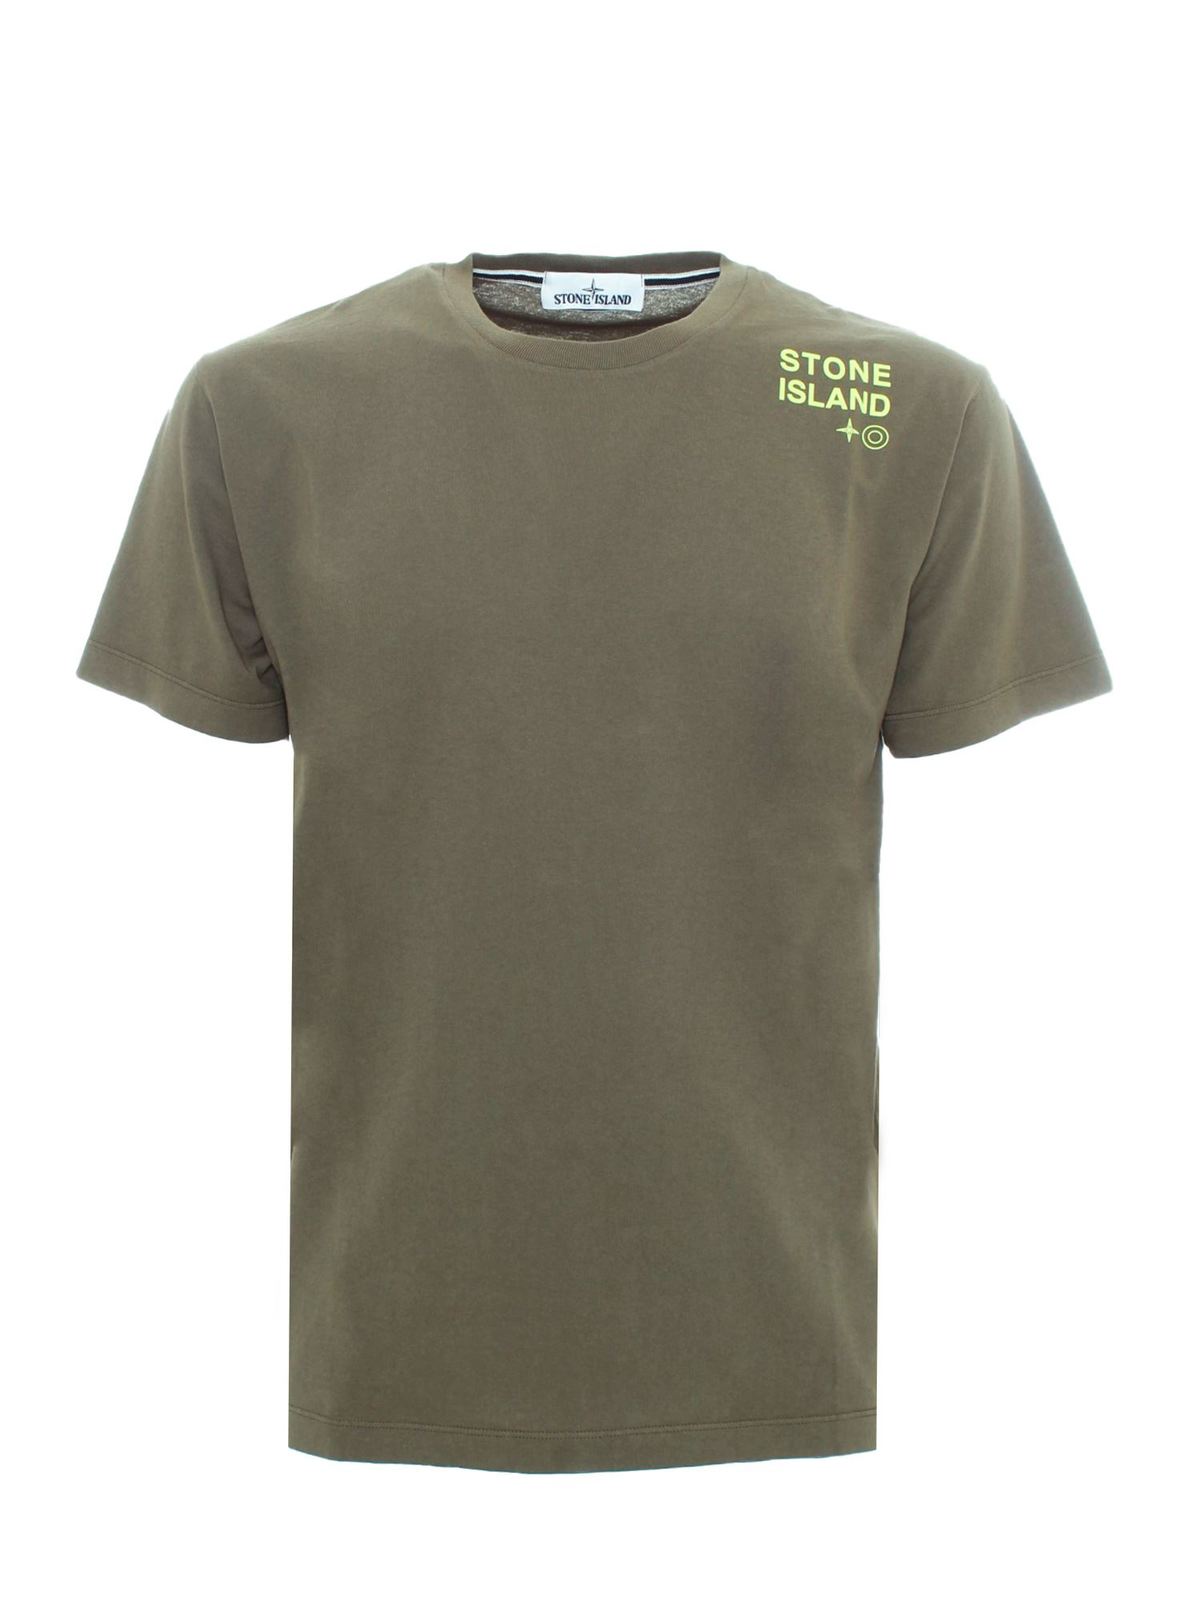 Stone Island LOGO LETTERING T-SHIRT IN MILITARY GREEN